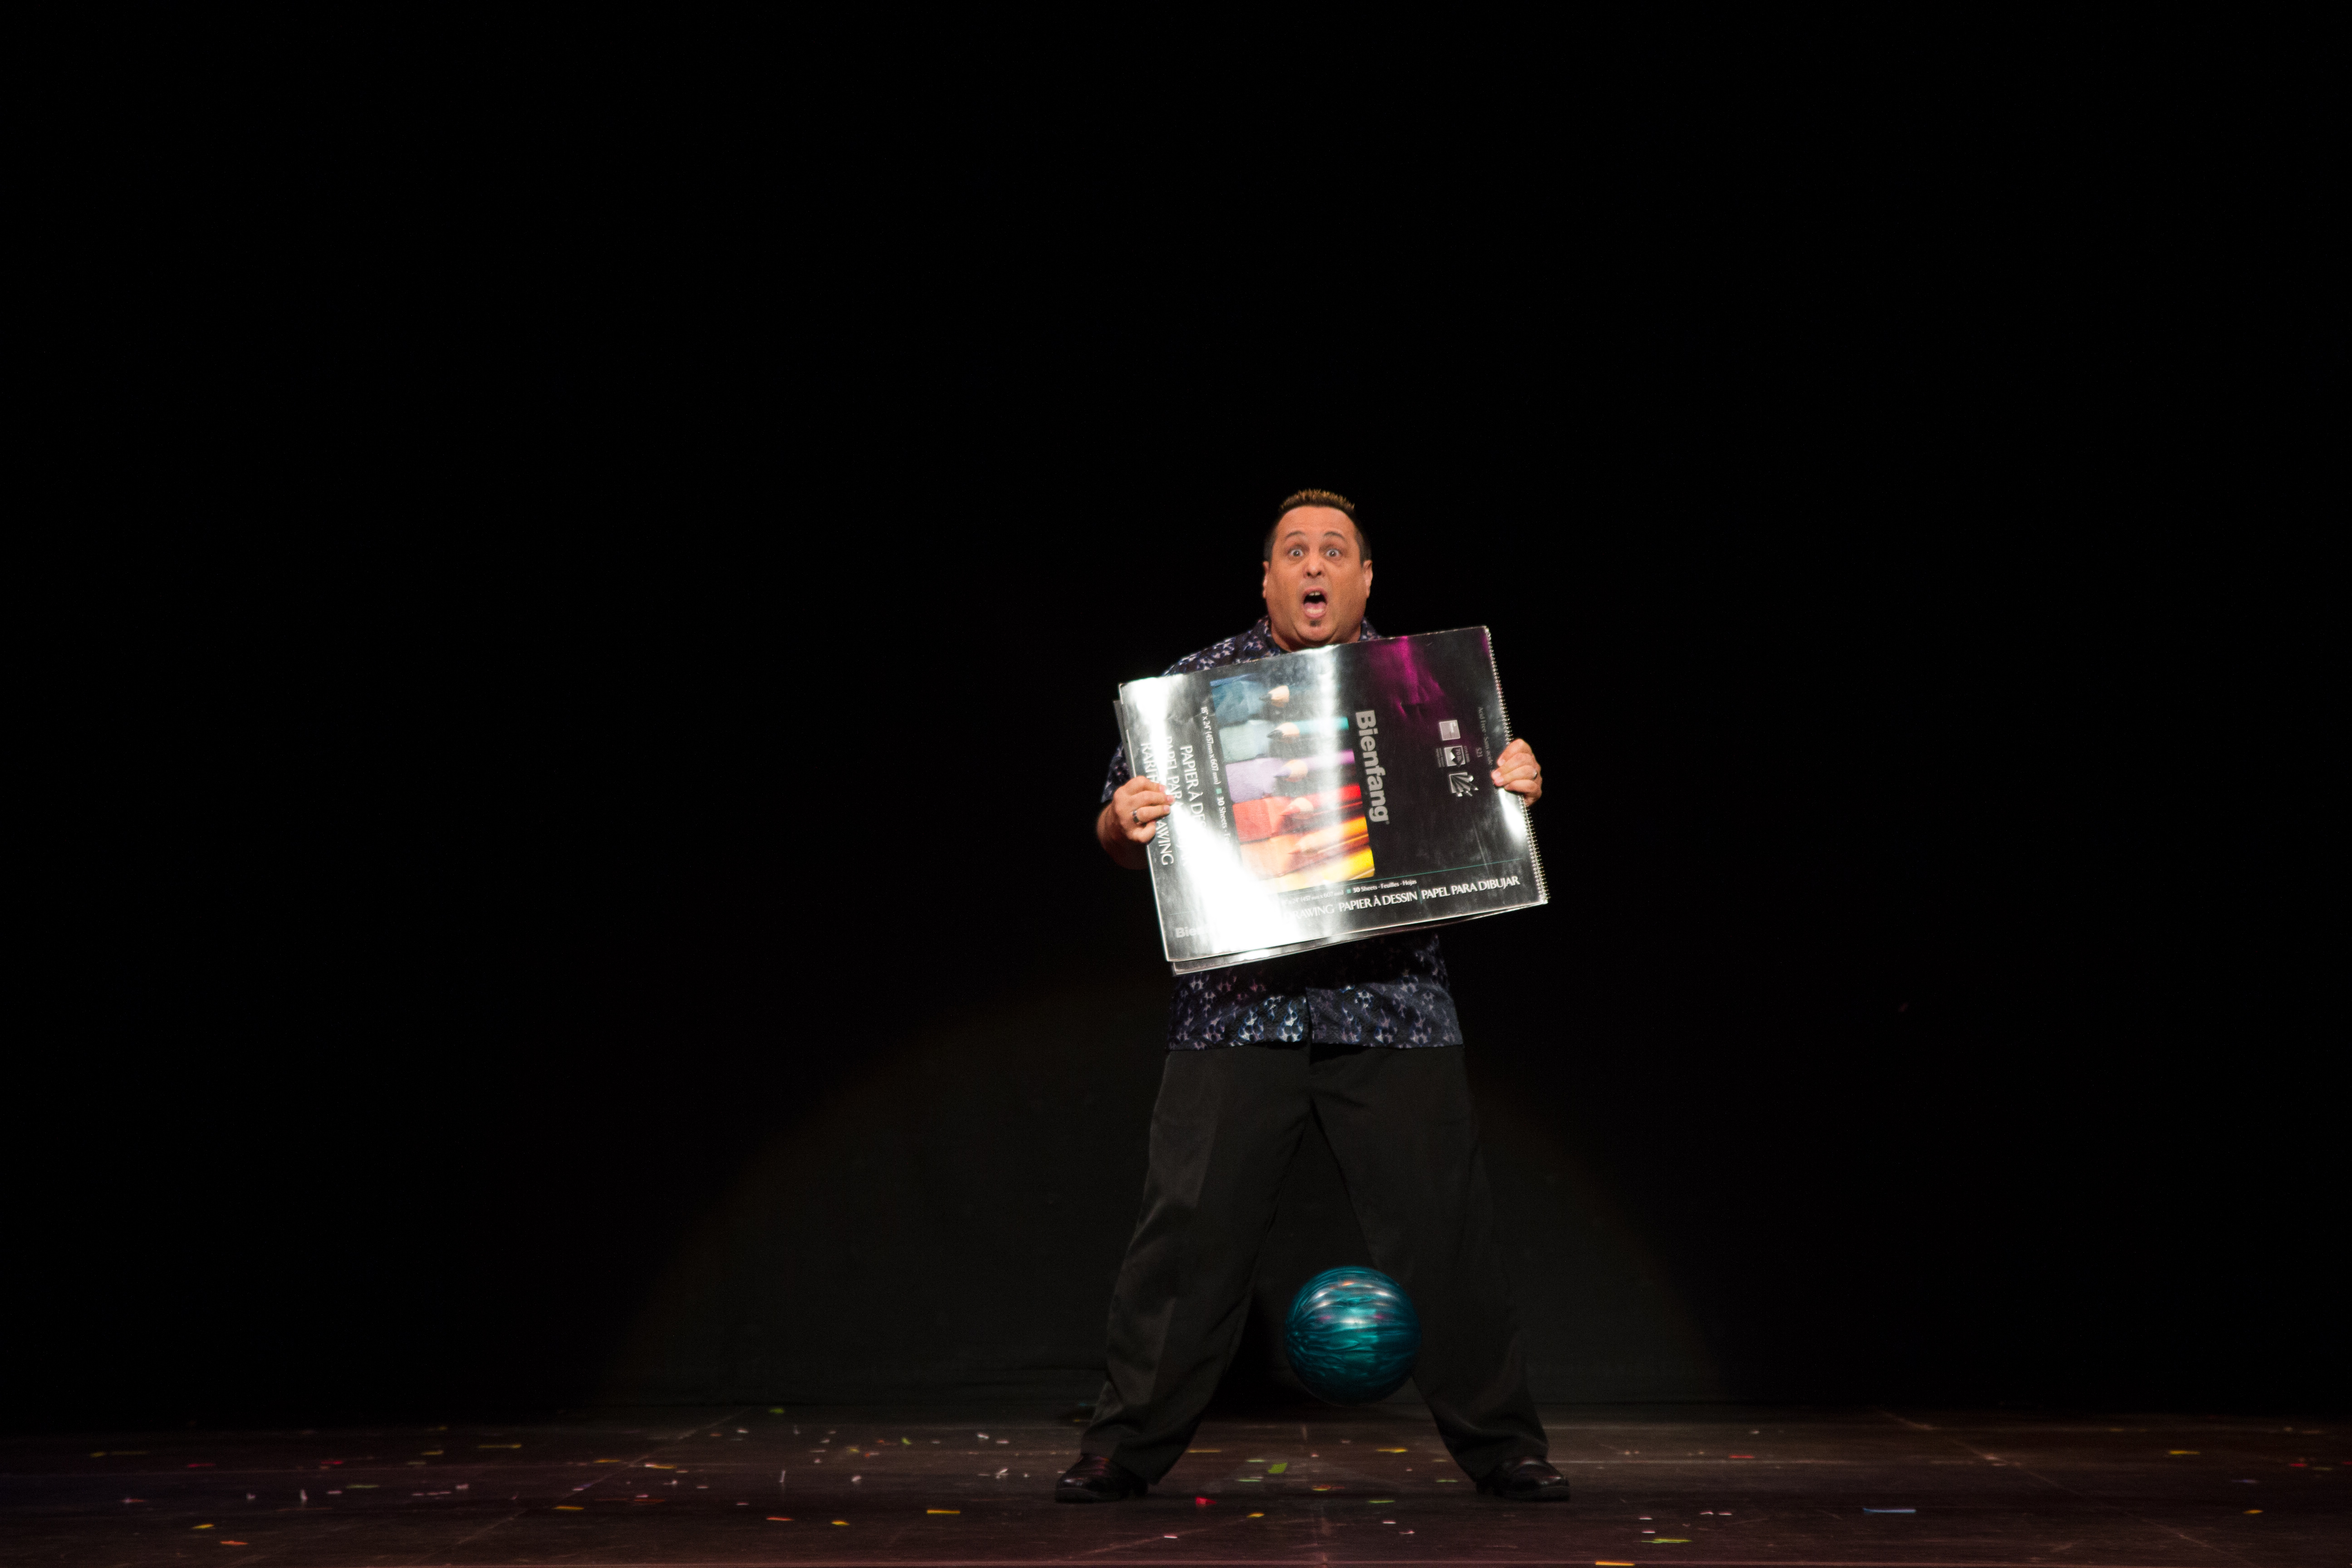 Michael C. DeSchalit making a bowling bowl drop out of nowhere during the Stars of Magic 26 anniversary show.